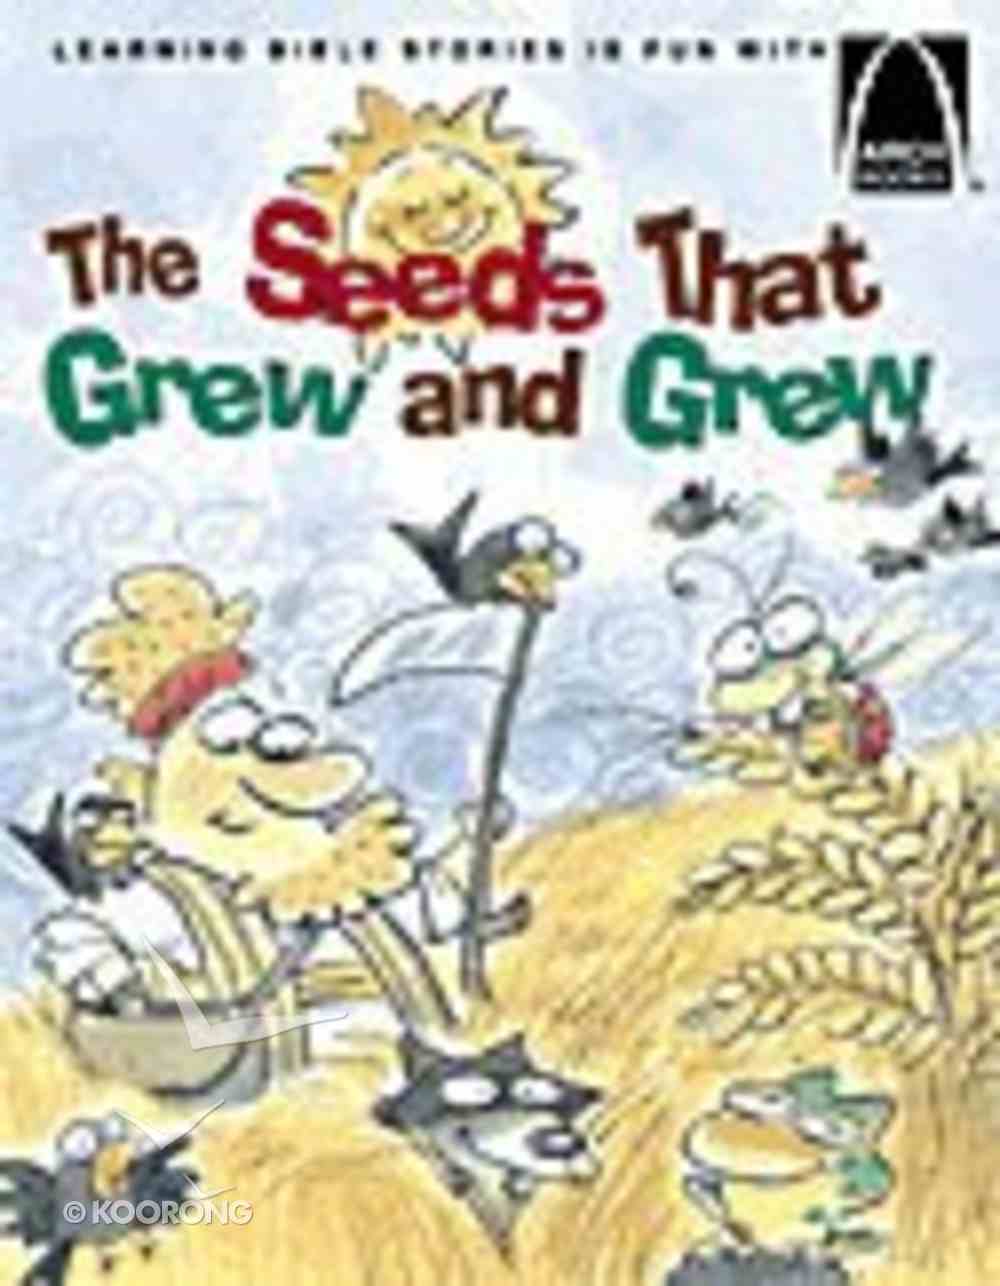 The Seeds That Grew and Grew (Arch Books Series) Paperback